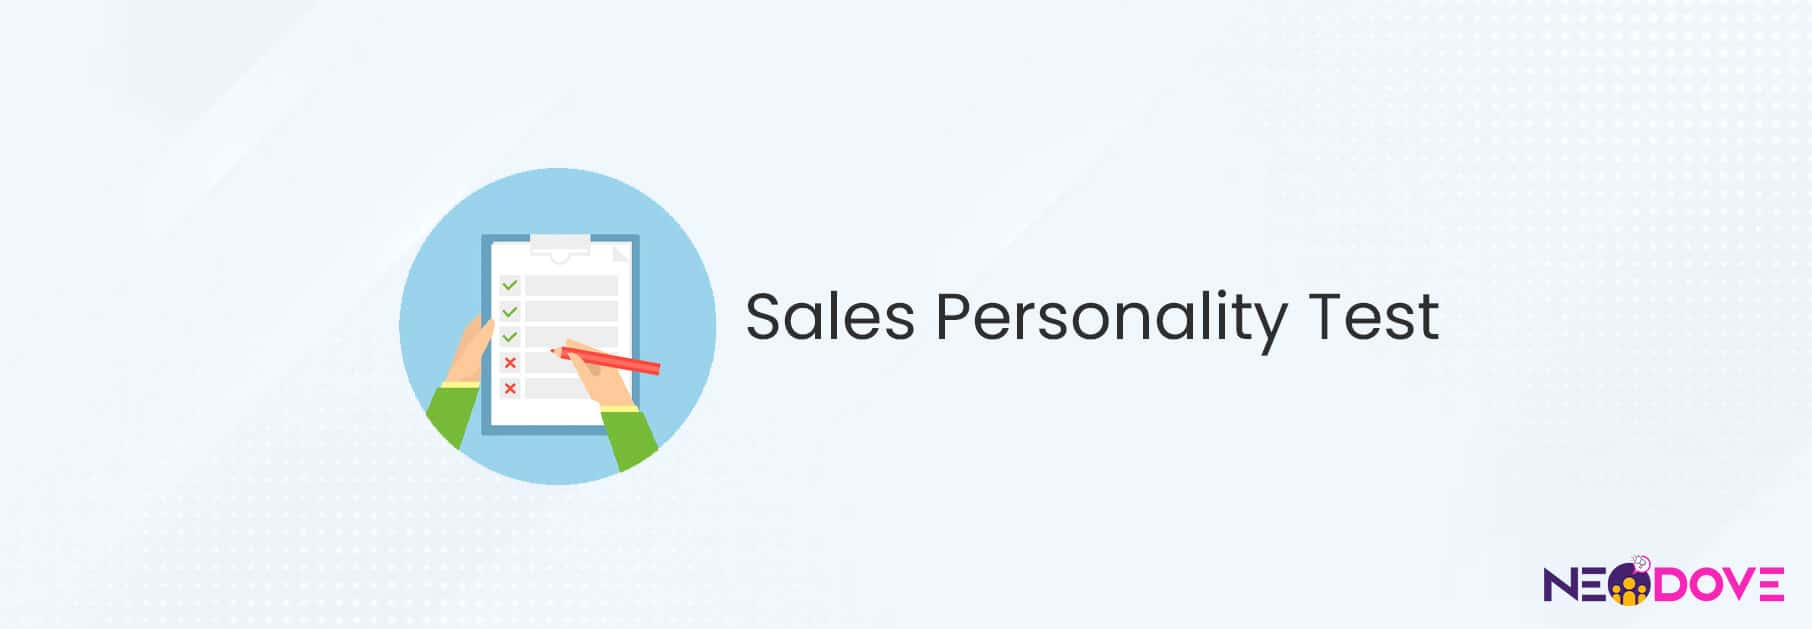 Sales Personality test